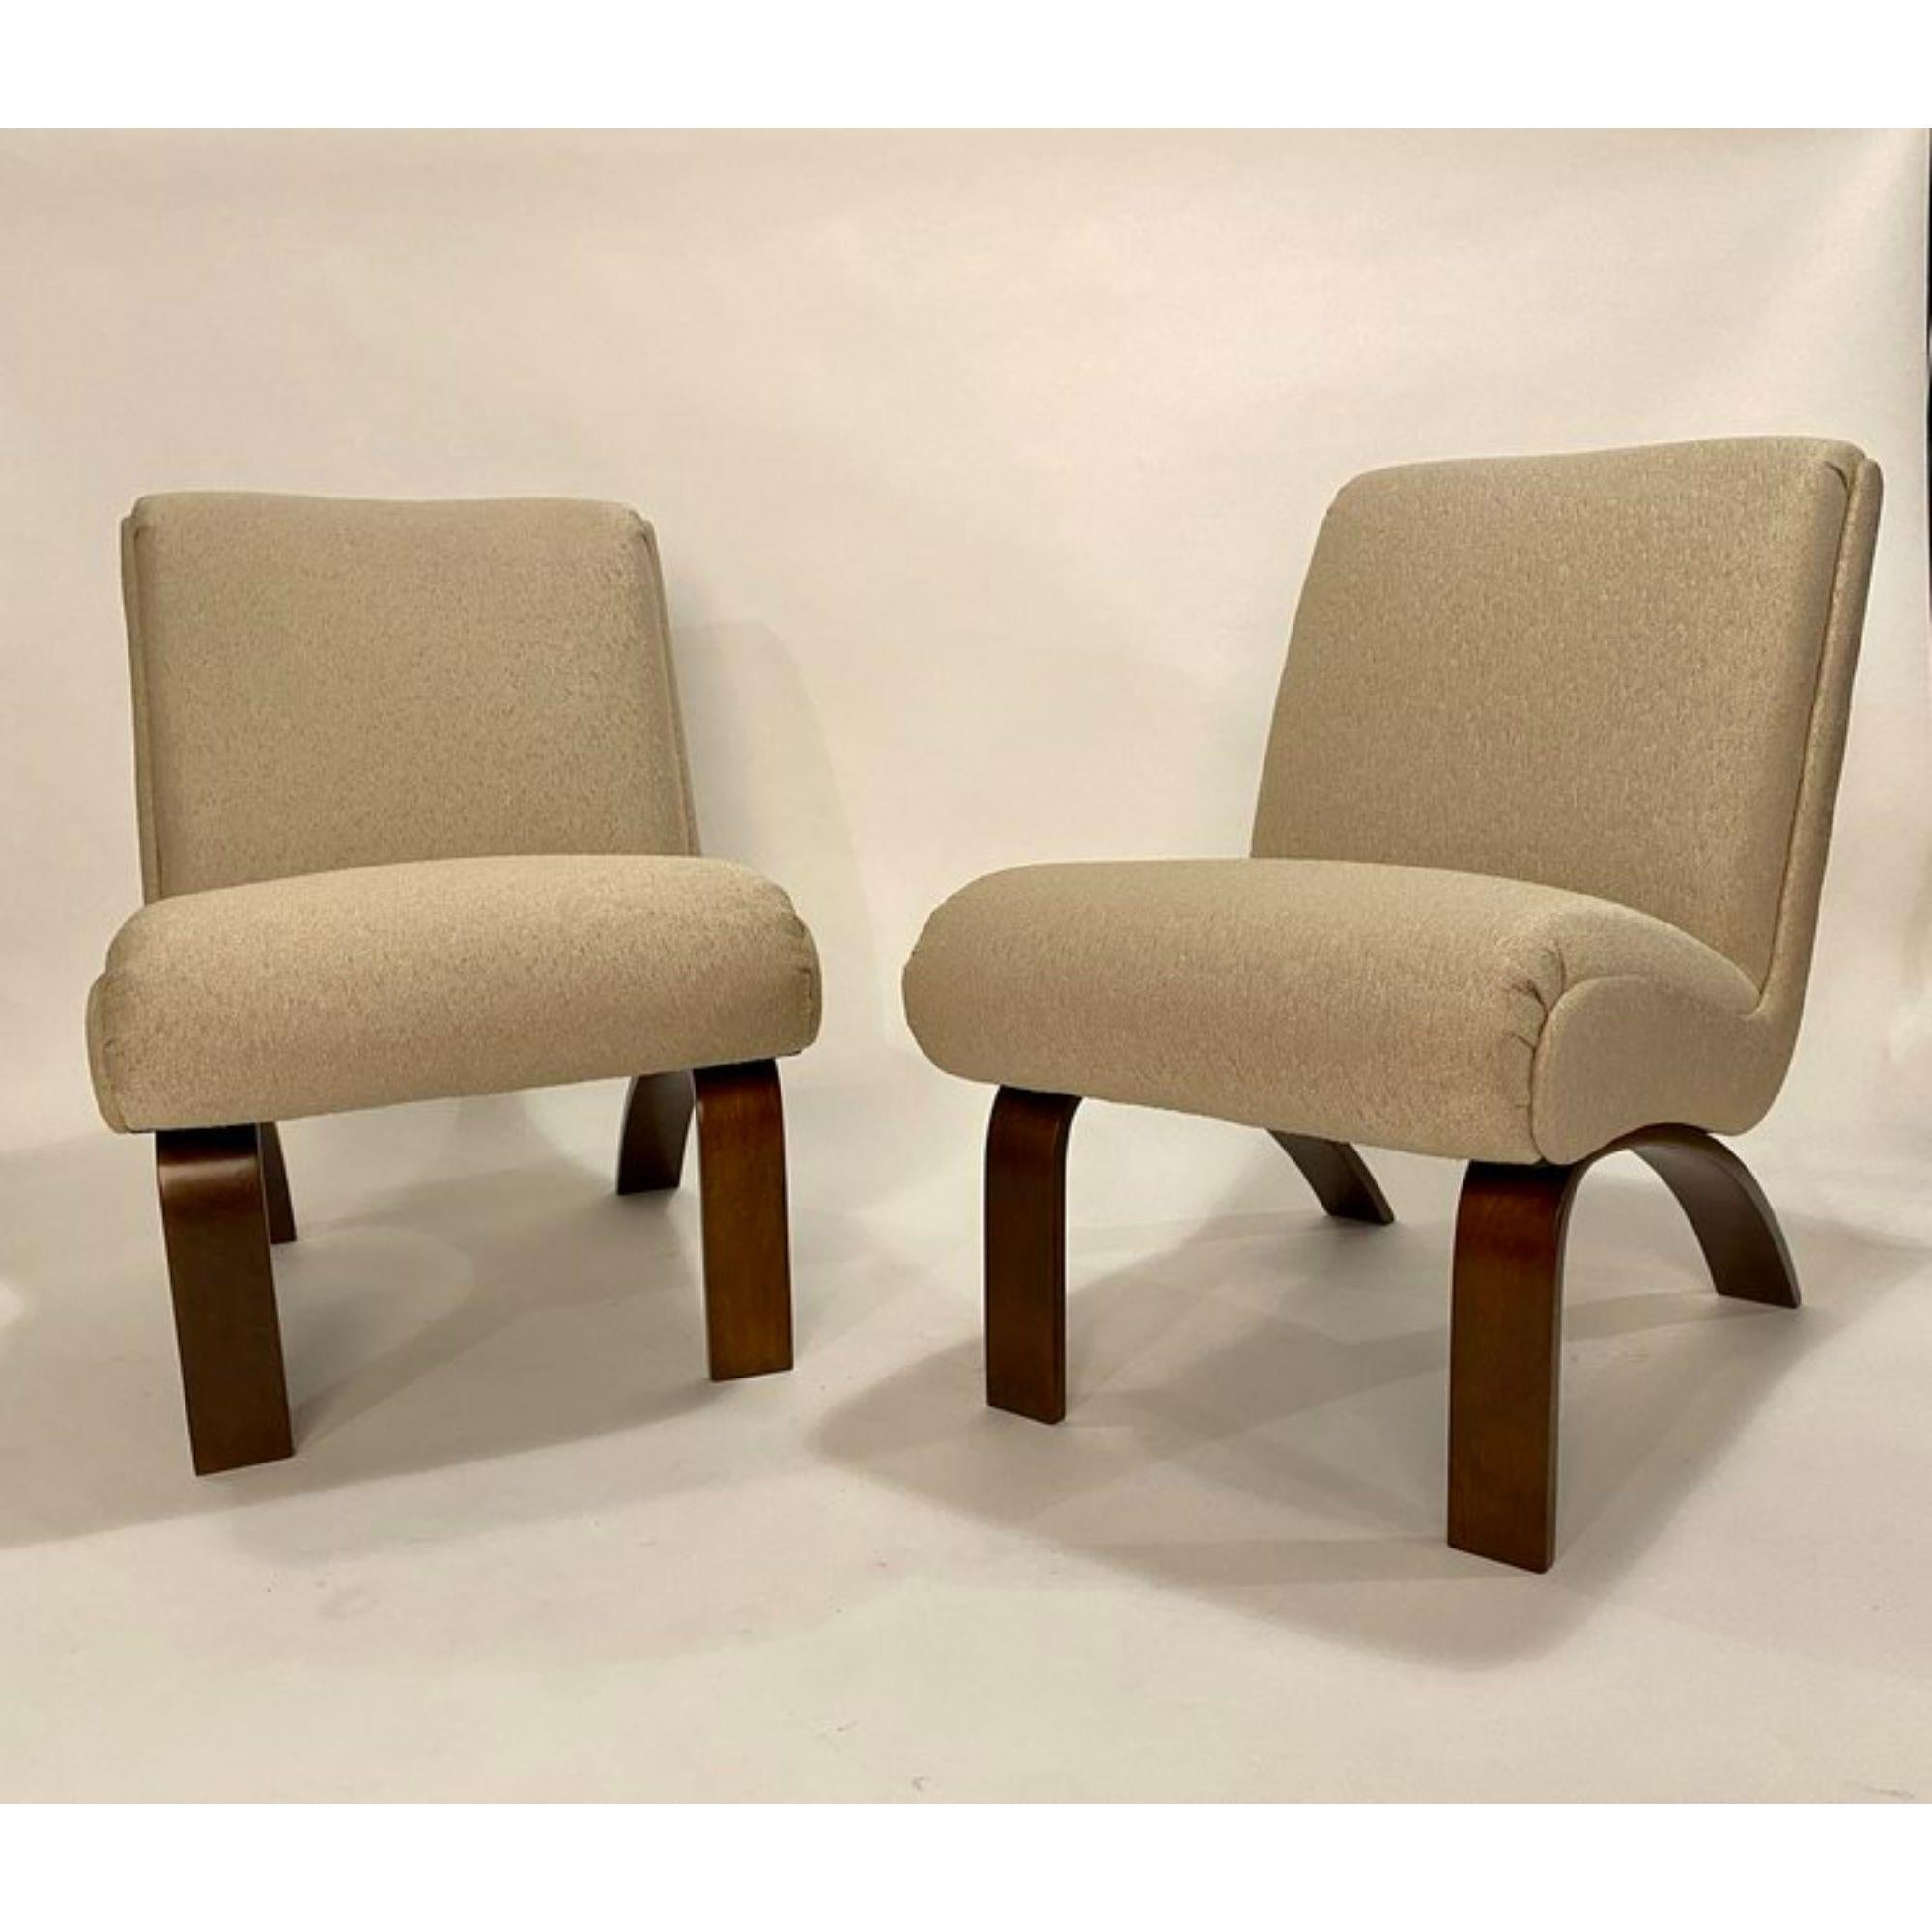 Pair of vintage Thonet slipper chairs in restored walnut bentwood legs and reupholstered in a champagne chenille fabric.

Additional Information:
Materials: Bentwood Walnut, Fabric
Color: Champagne
Style: Art Deco, Mid-Century Modern
Period: